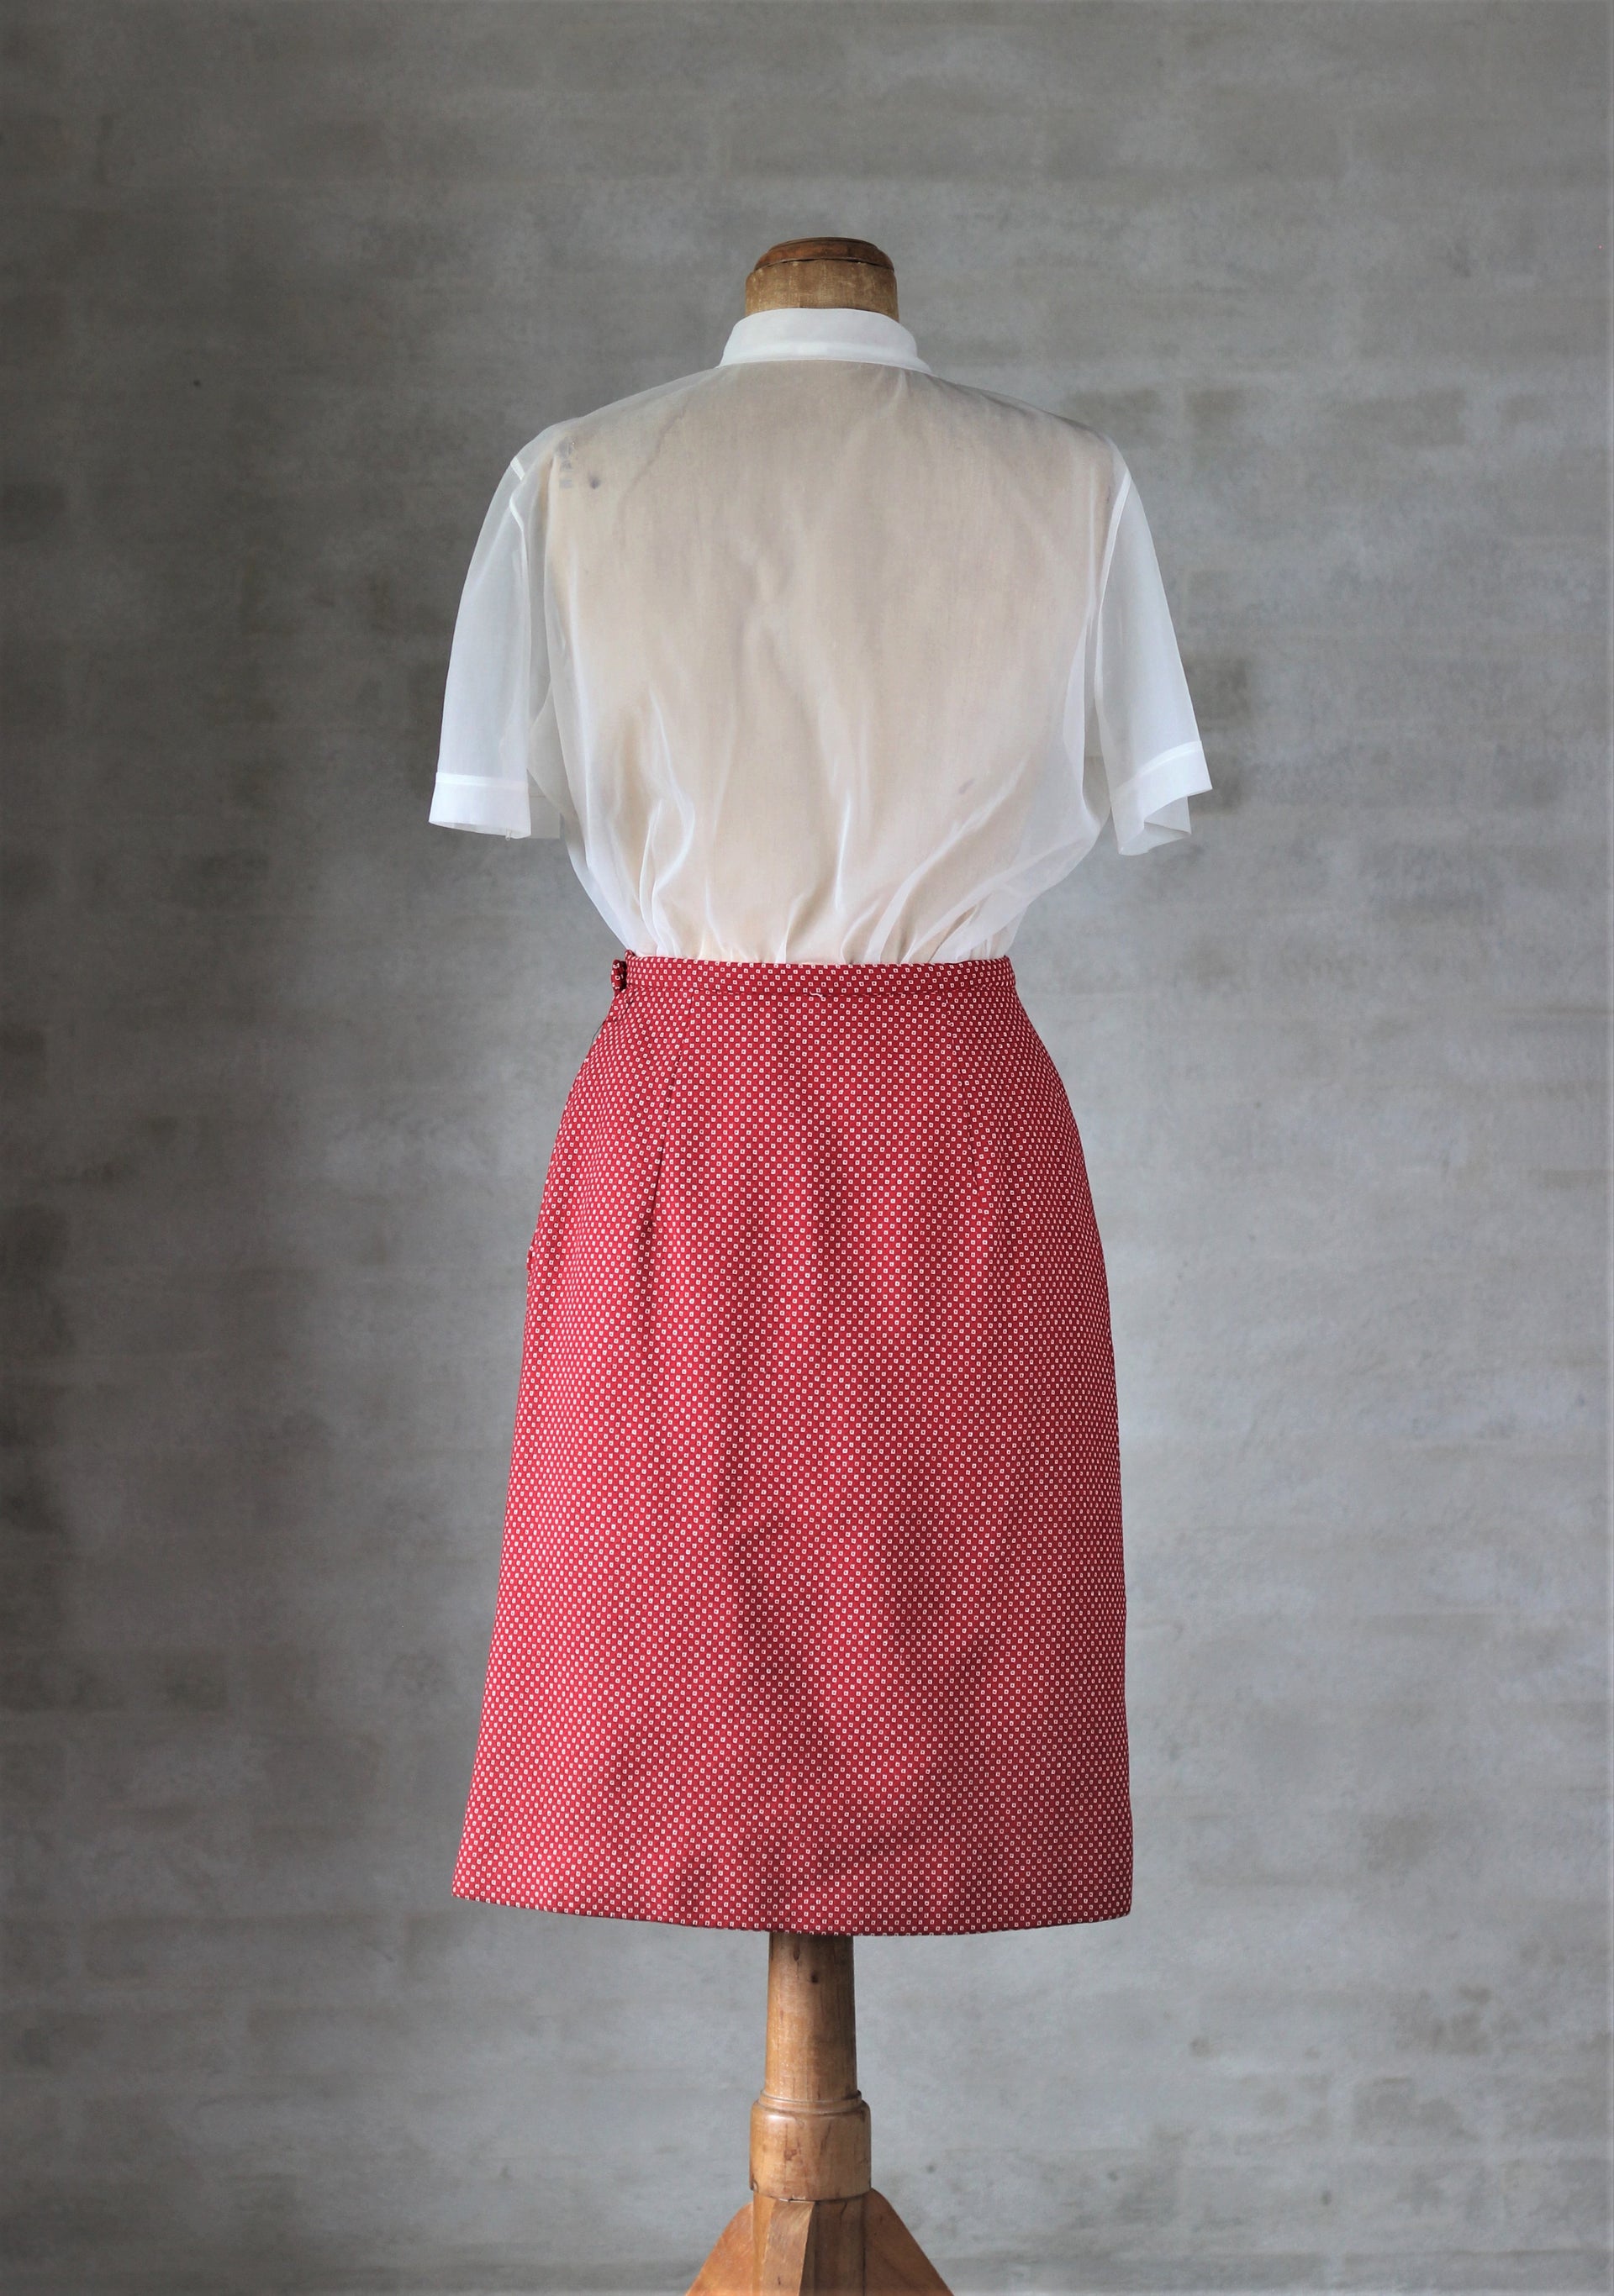 1960s/1970s Deadstock Italian Red Wool Skirt Suit with Belt//Size S/M             SU4